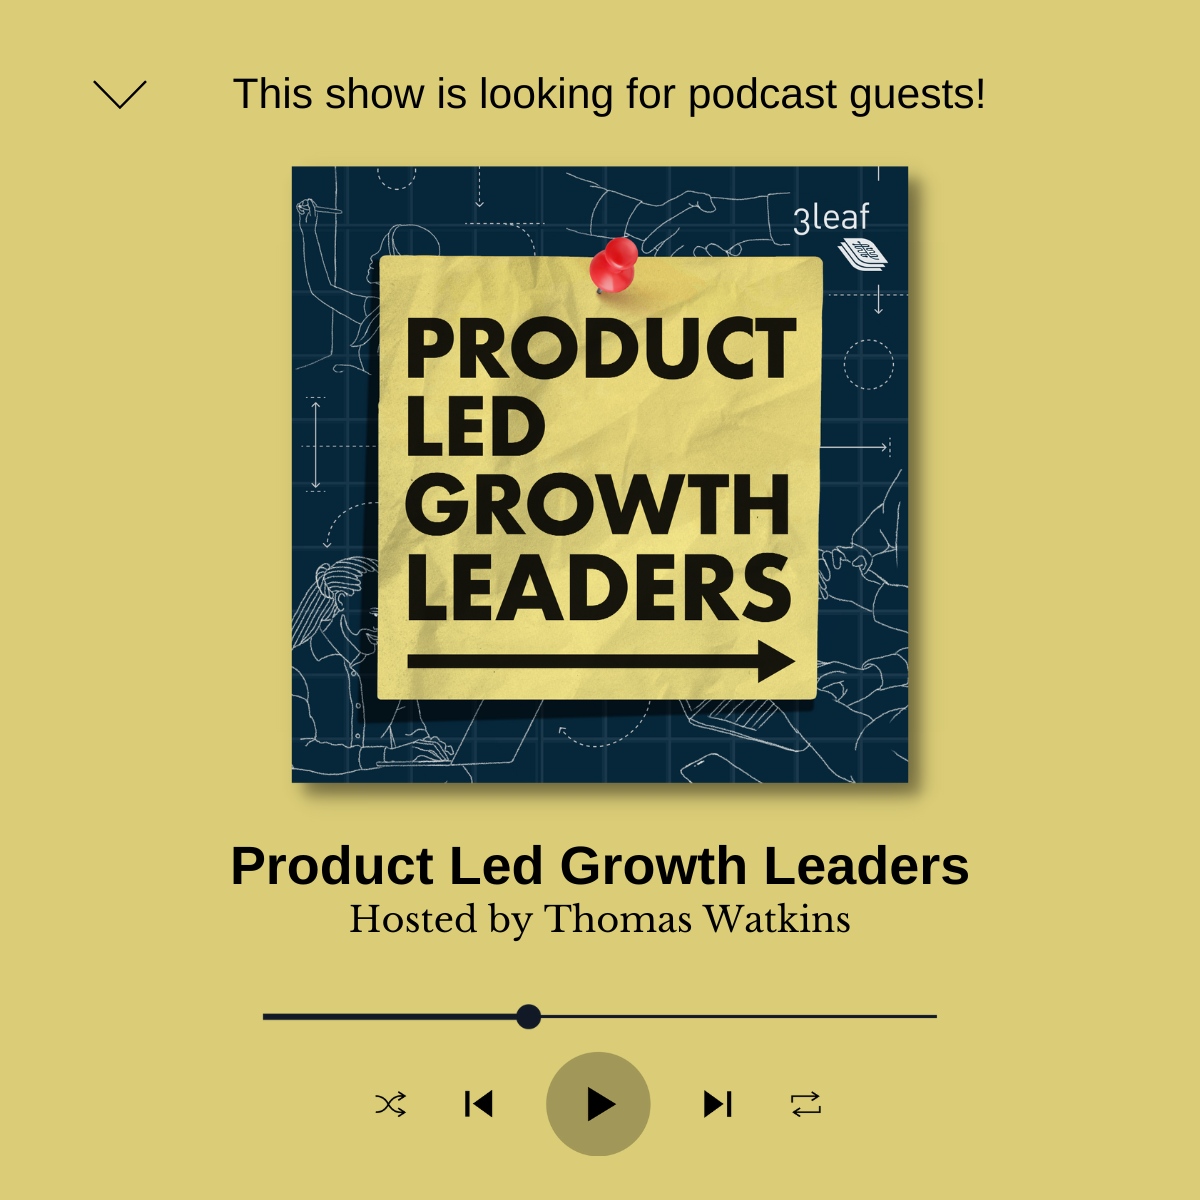 The Product Led Growth Leaders Podcast hosted by @3LeafMethod's Thomas Watkins seeks guests. Let's talk about you and your business!

Apply here: go.3leaf.consulting/podcast-guest-…

#TheThoughtfulEntrepreneur #PodcastShow #Leaders #SaaS #Technology #JournoRequest